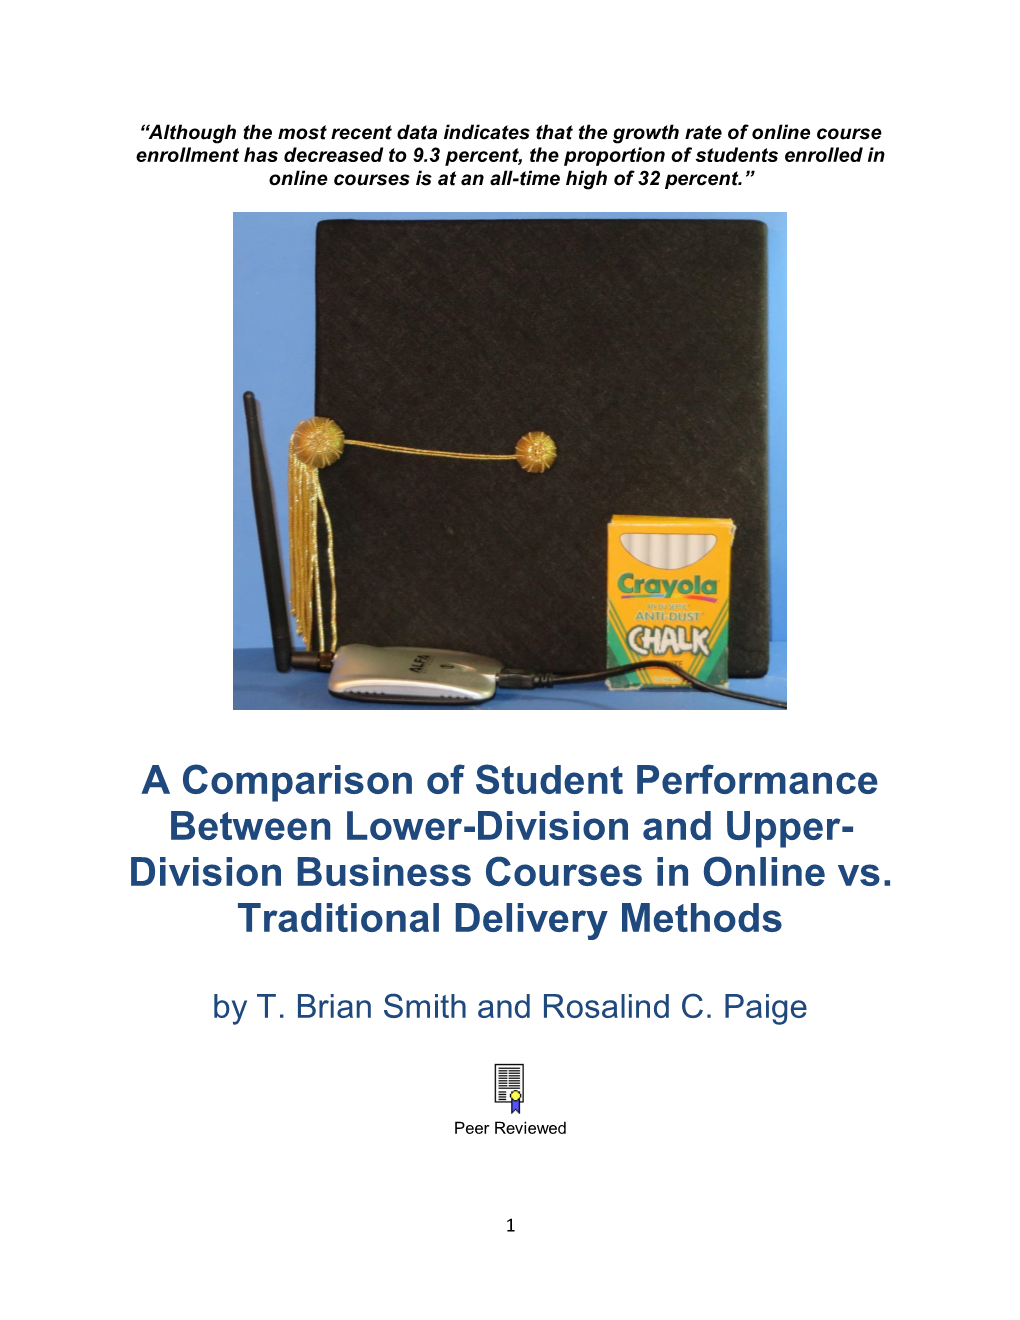 A Comparison of Student Performance Between Lower-Division and Upper- Division Business Courses in Online Vs